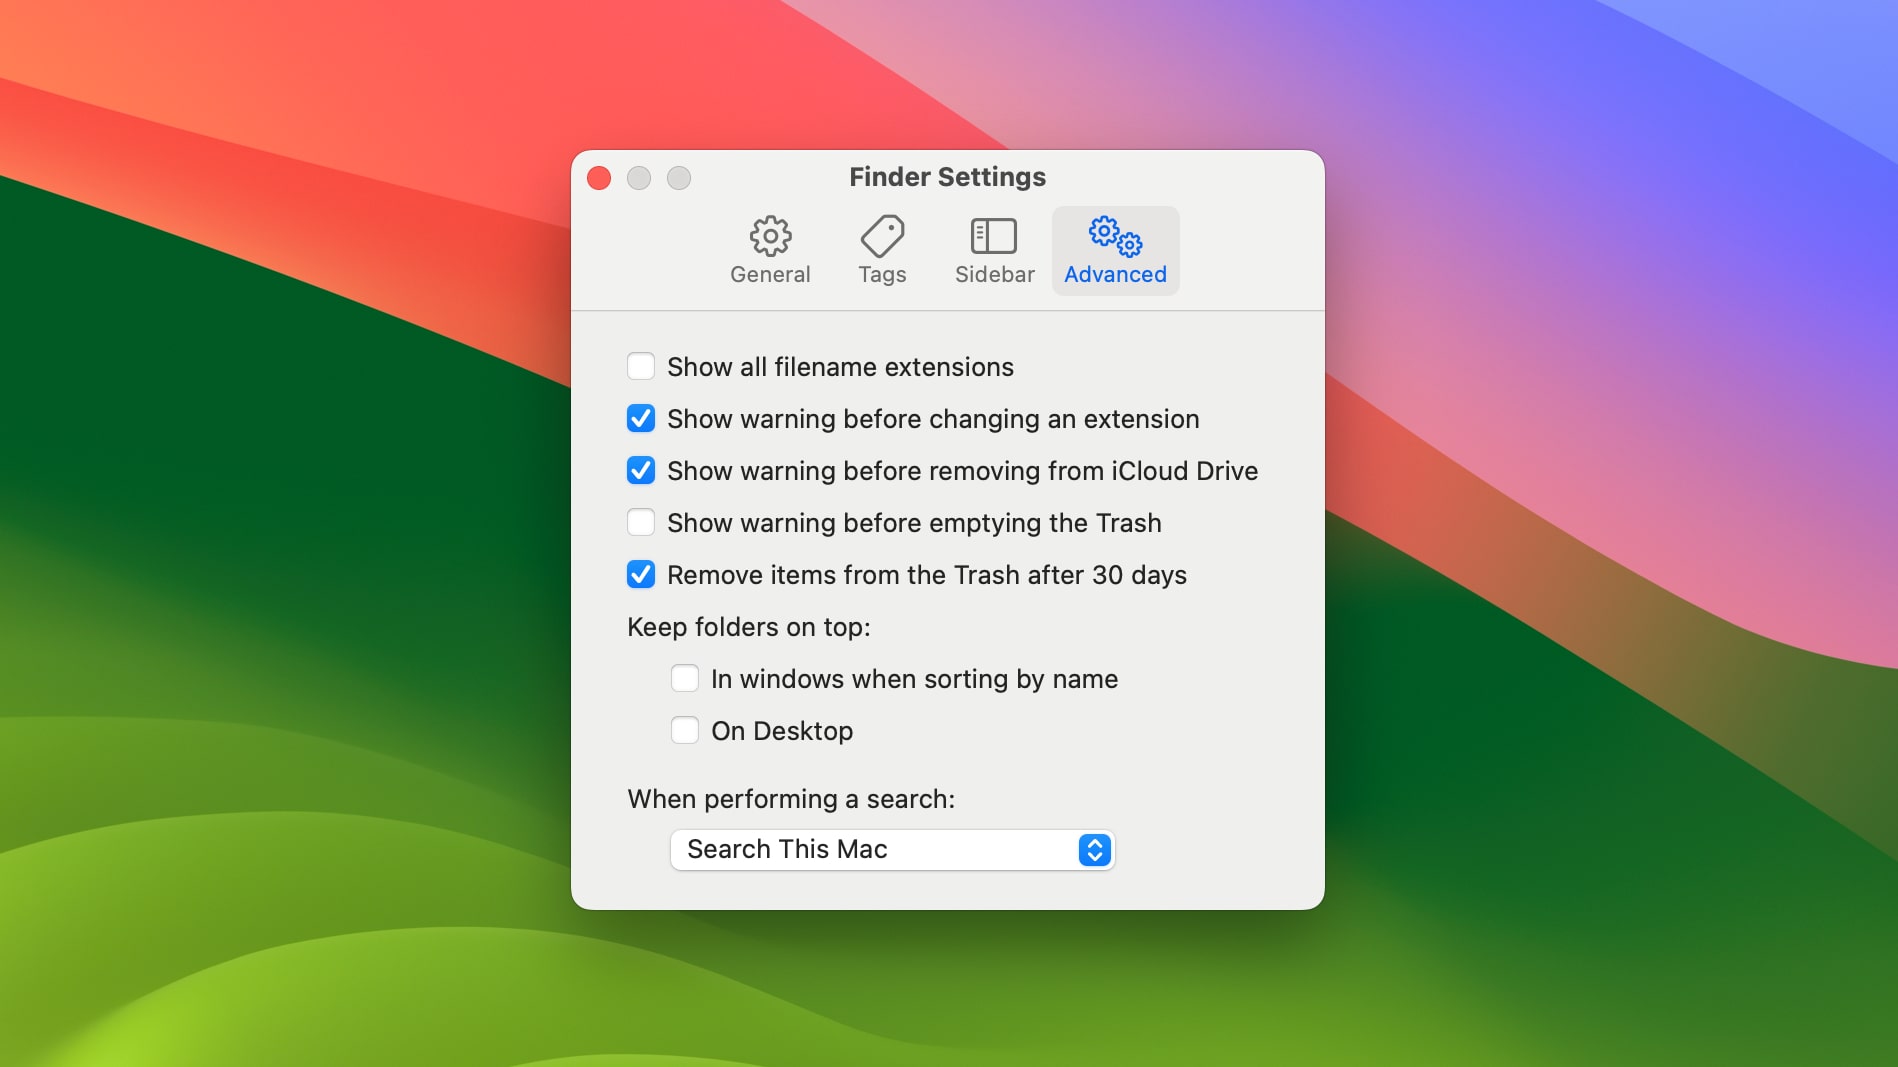 Finder settings in macOS Sonoma, with the Advanced tab selected.